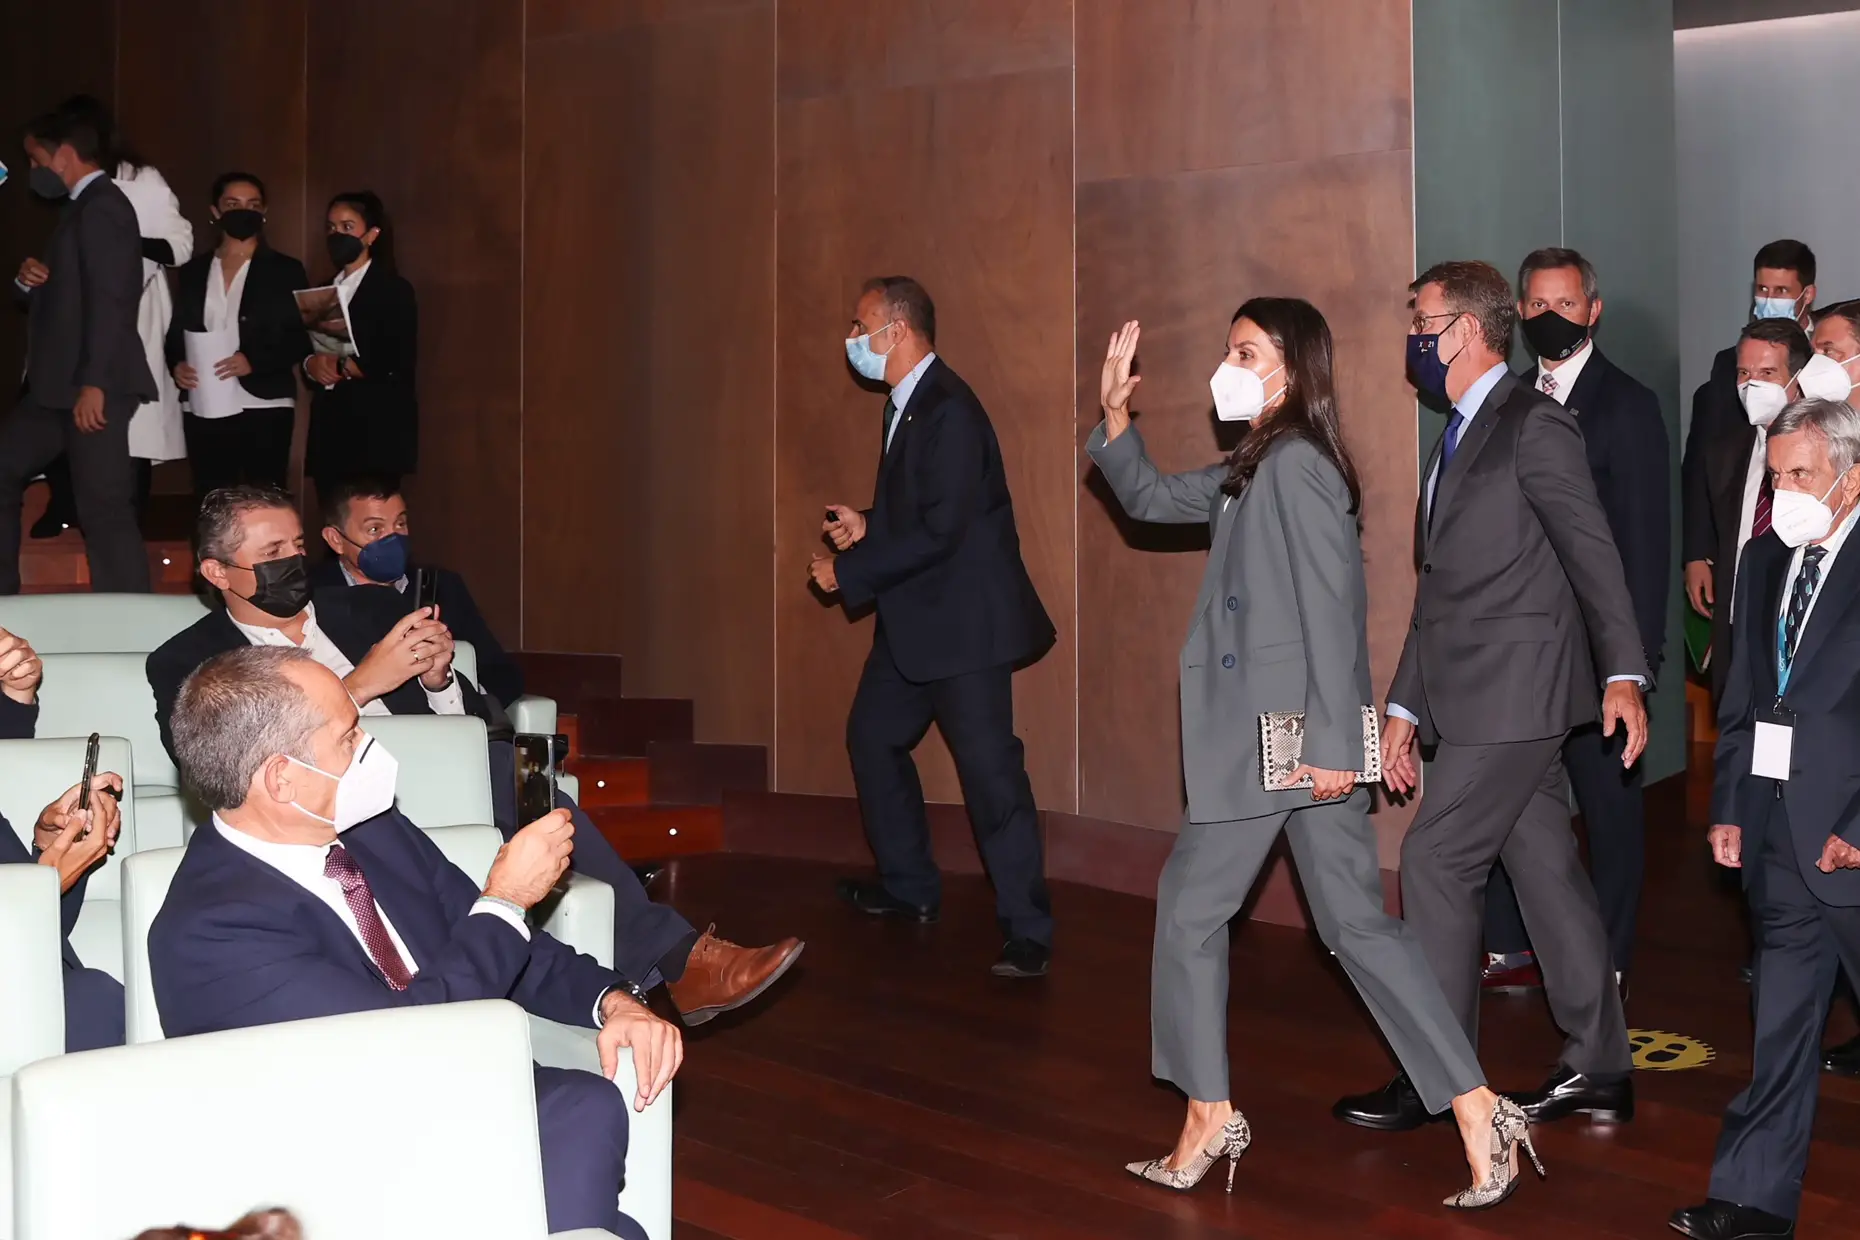 Queen Letizia at International Congress for Nutrition and Health